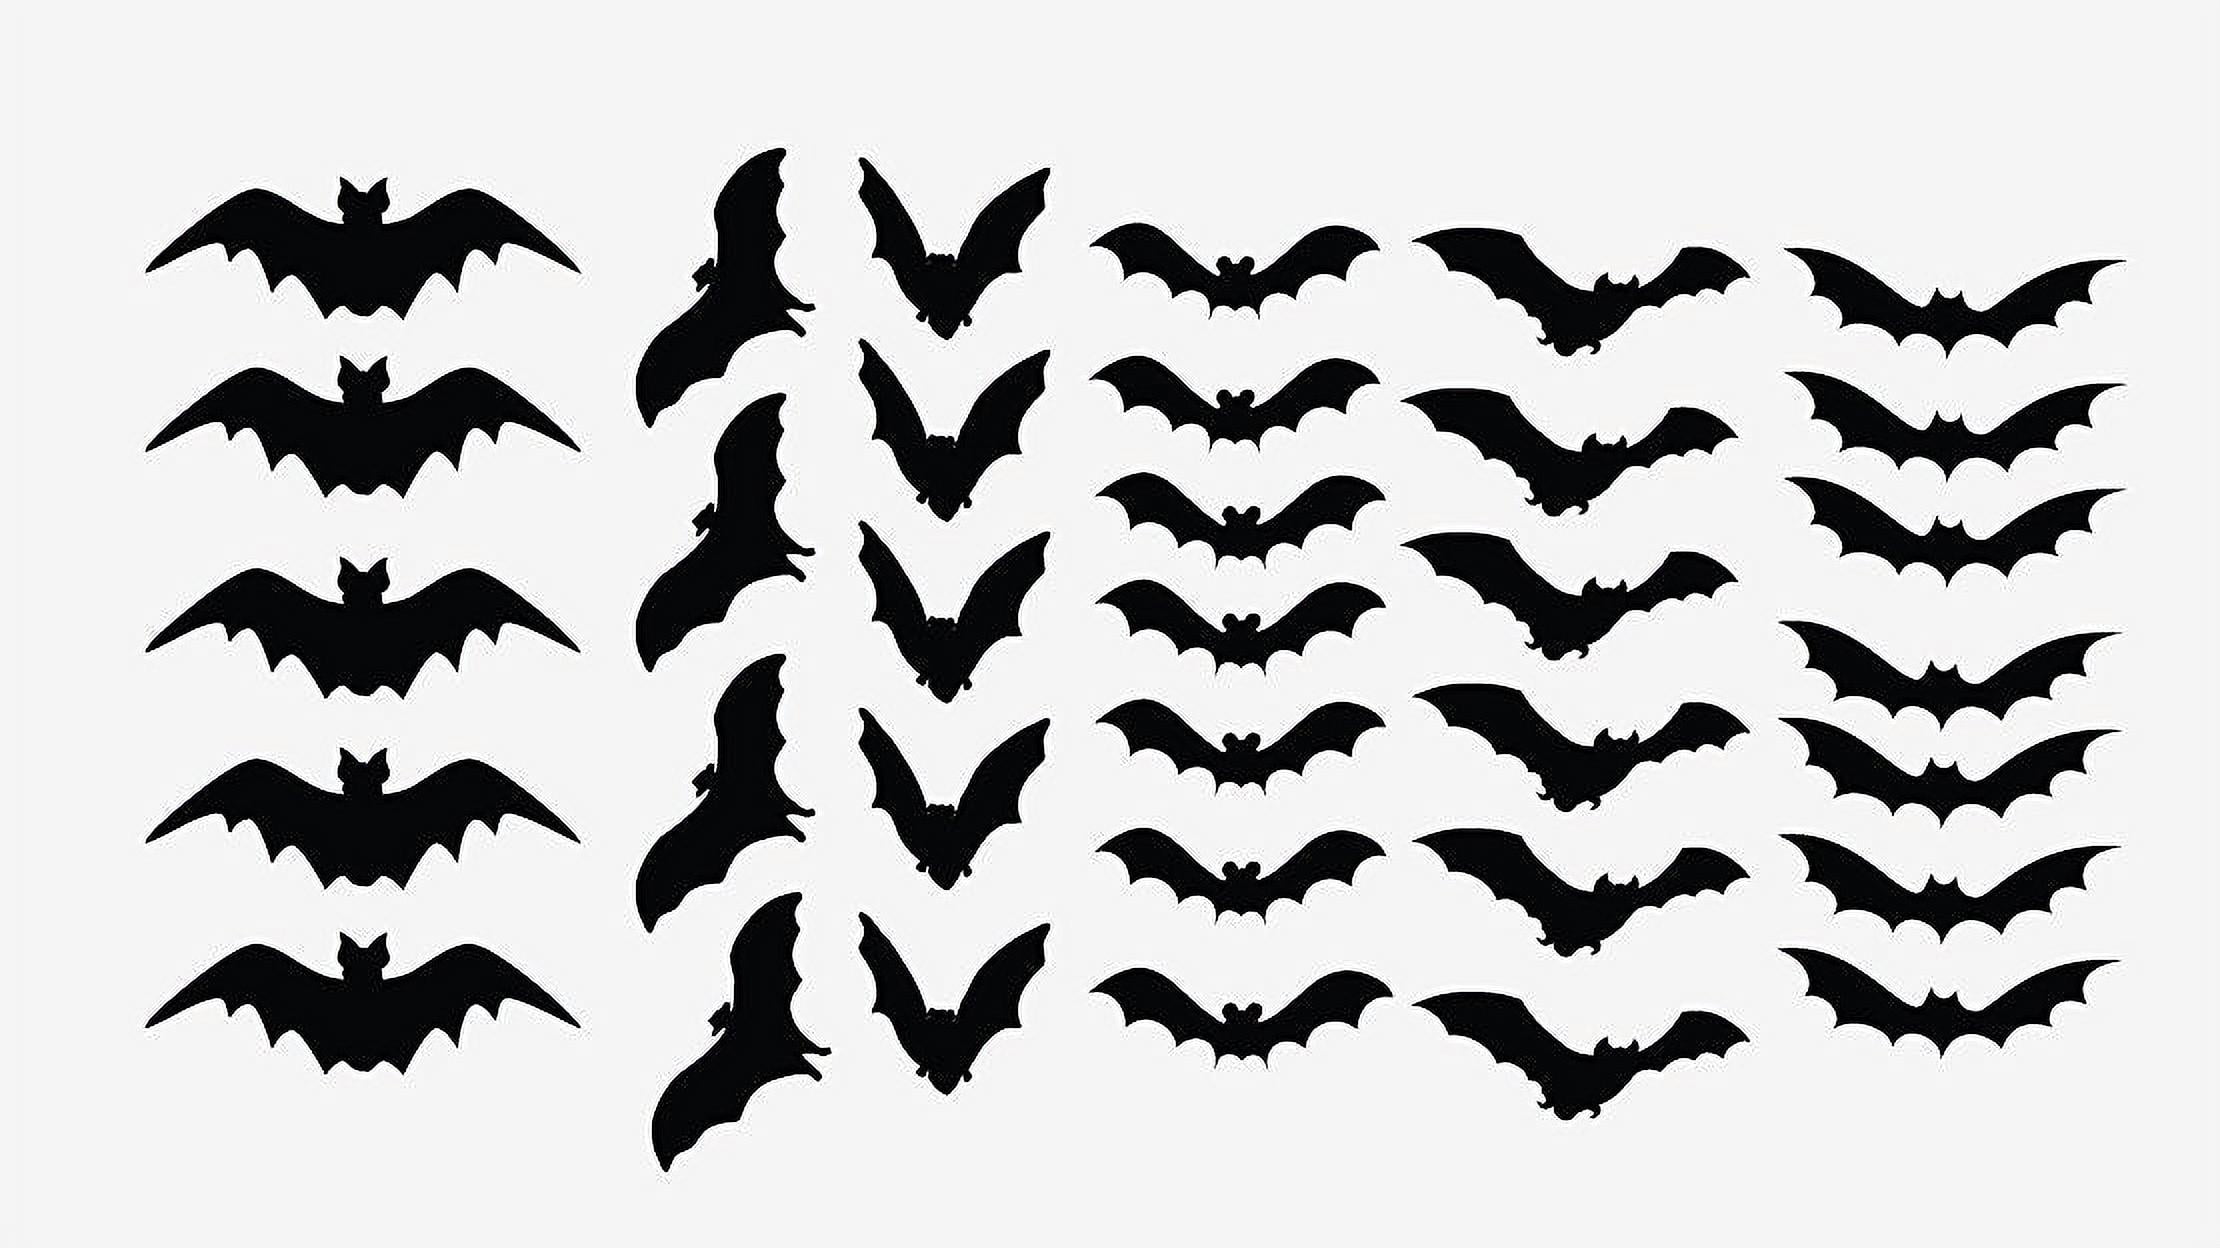 PAMASE 226 Pieces Black Bats Spiderwebs Window Clings Decals Stickers Nonadhesive Self-Static Scary Spider Web Window Stickers for Holiday Halloween Party Haunted House Decorations Supplies Favors 